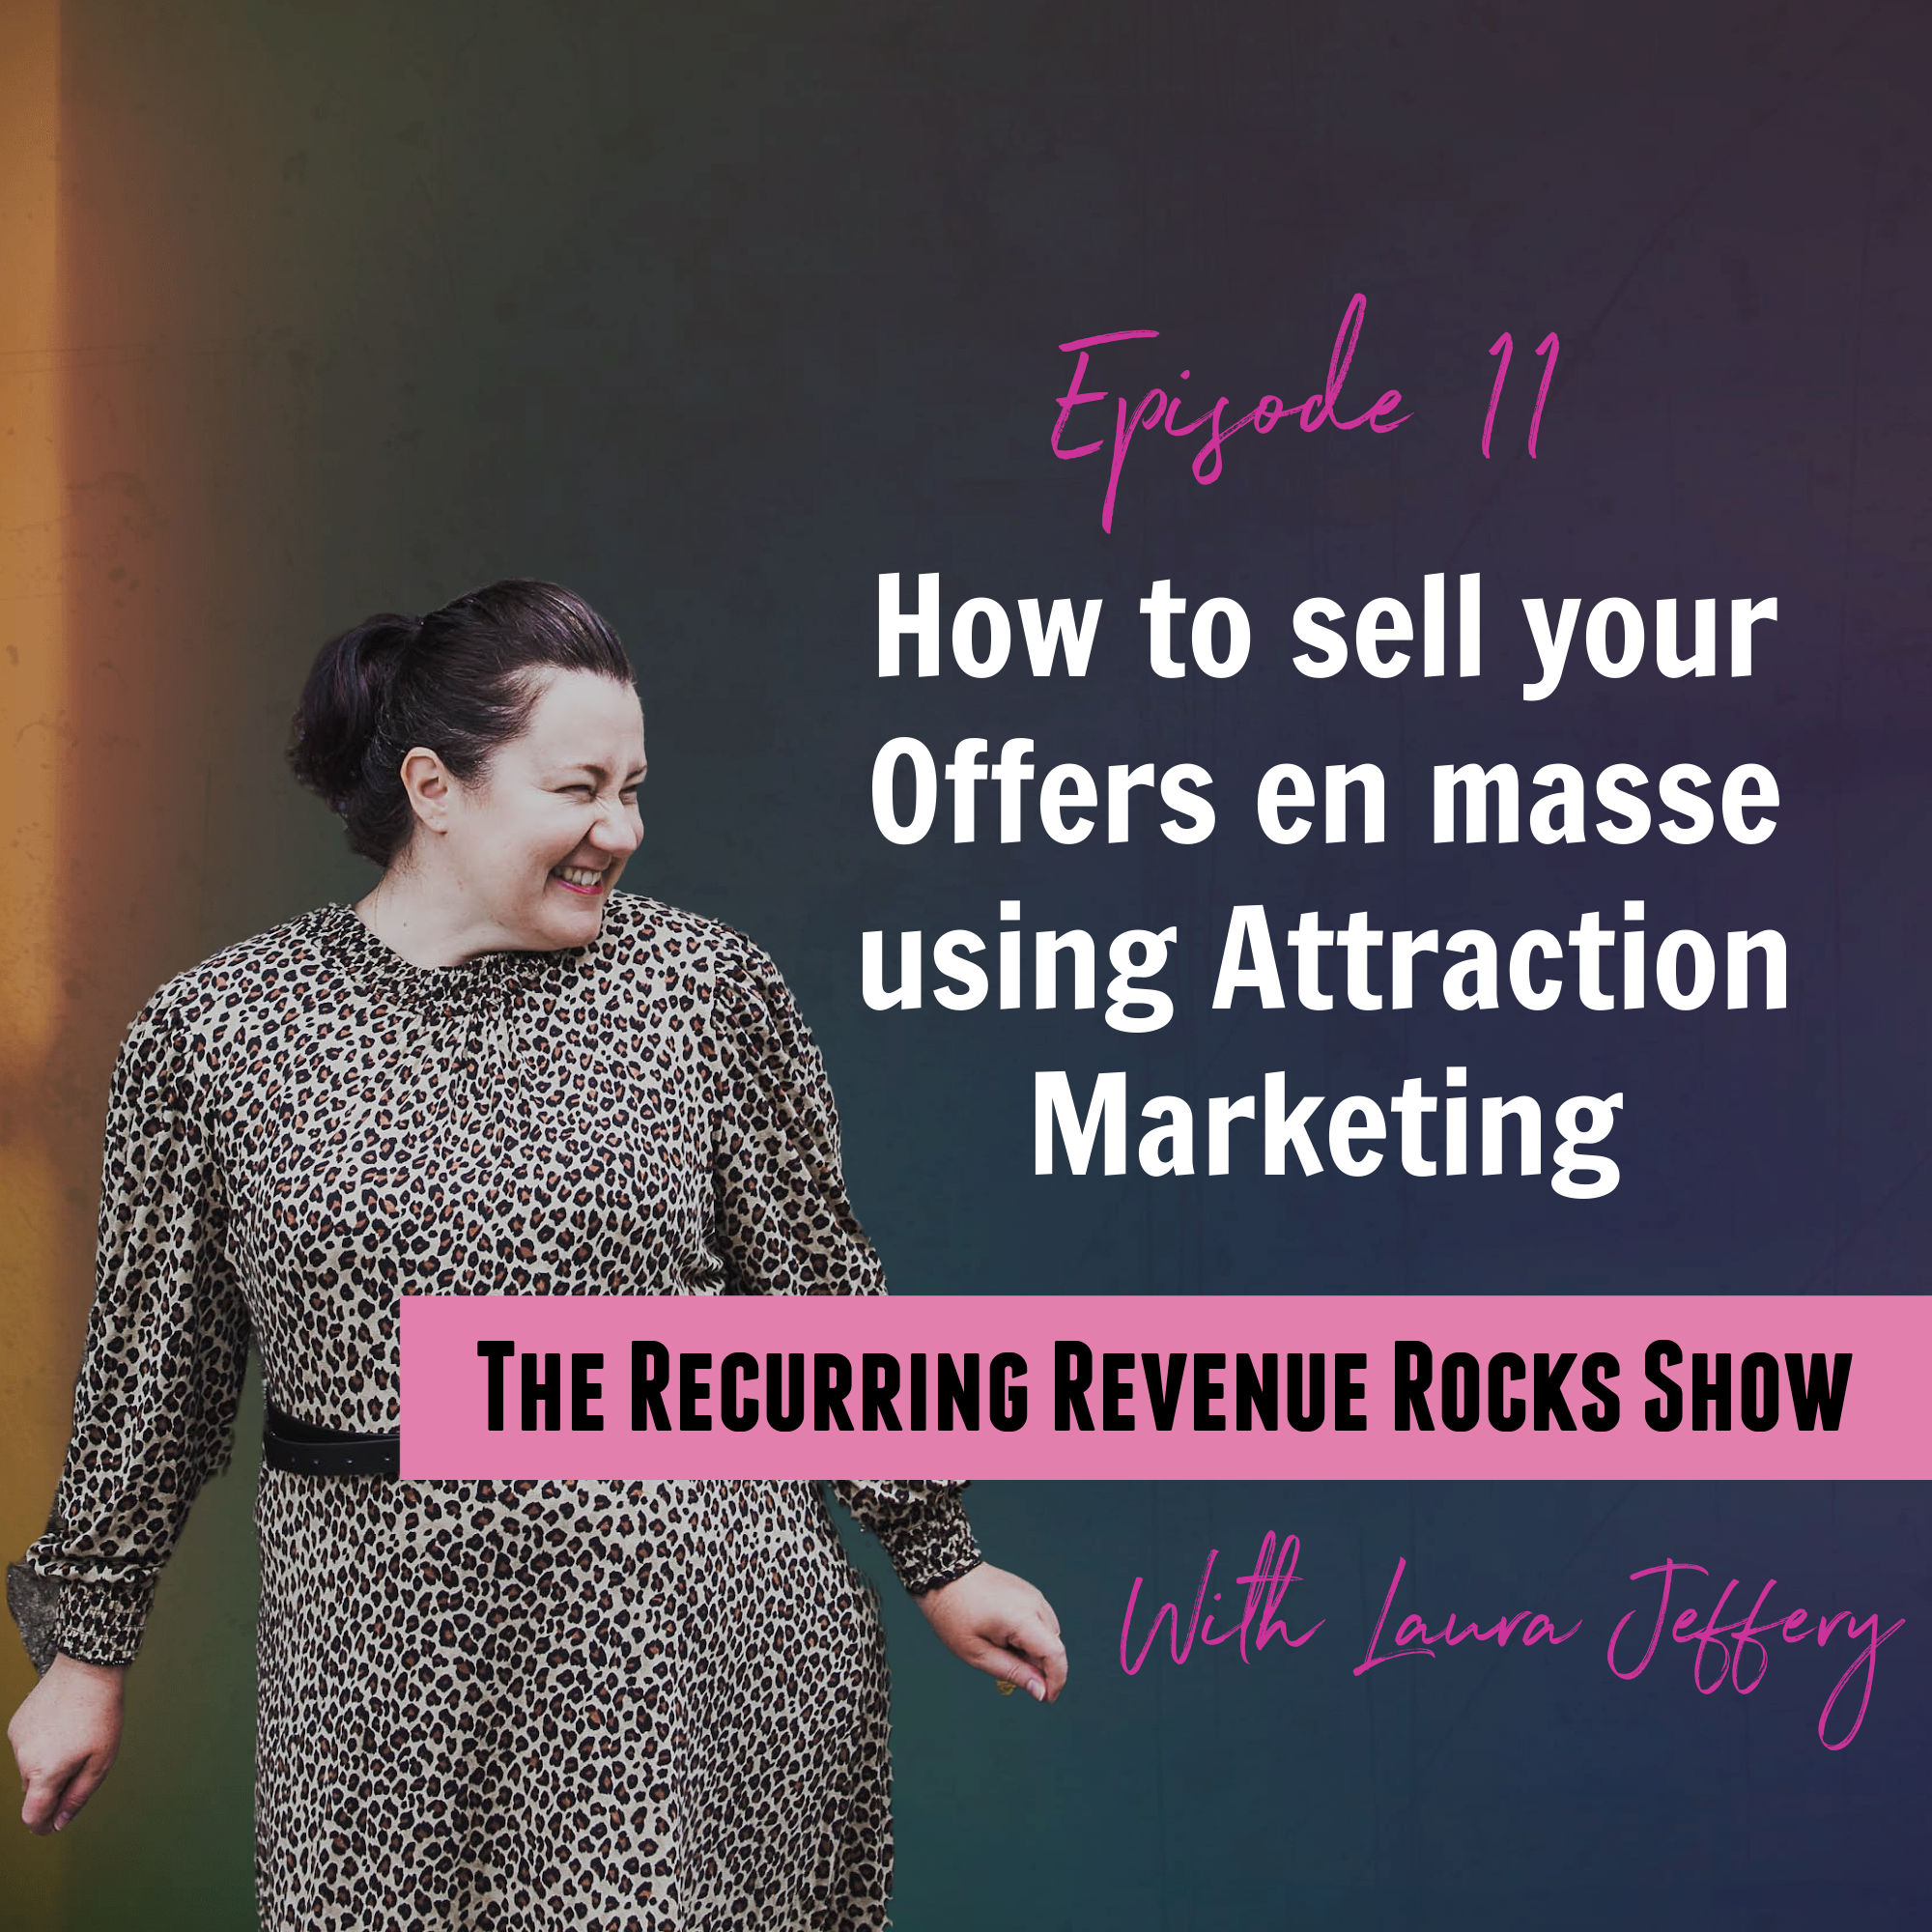 How to sell your Offers en masse using Attraction Marketing